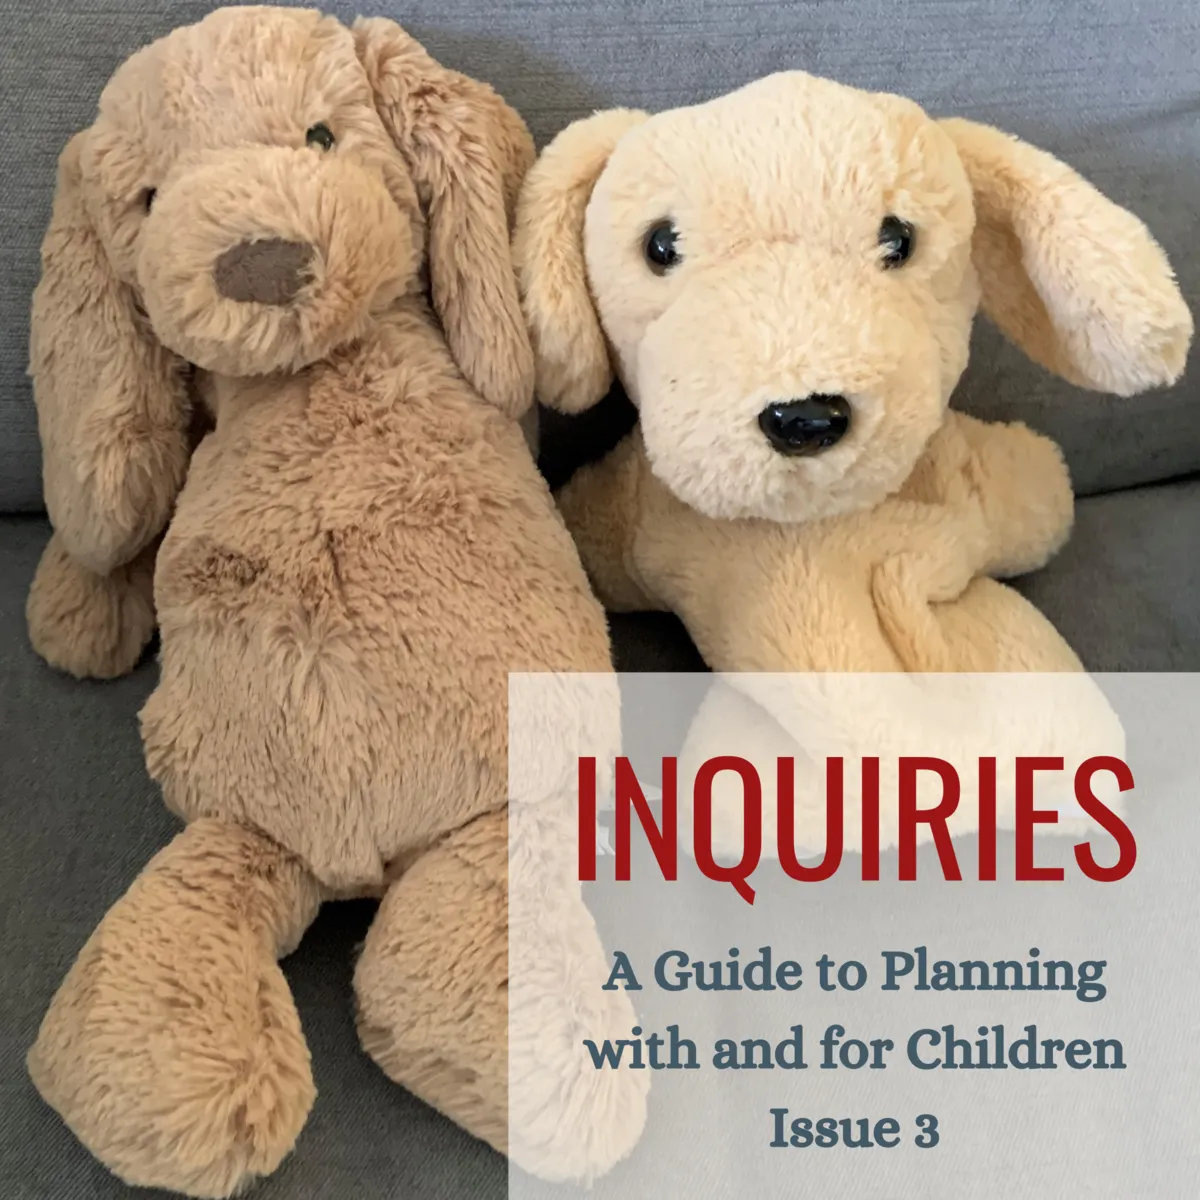 FREE DOWNLOAD - Inquiries - Issue 3 - Sharing Love and Care with a Toddler